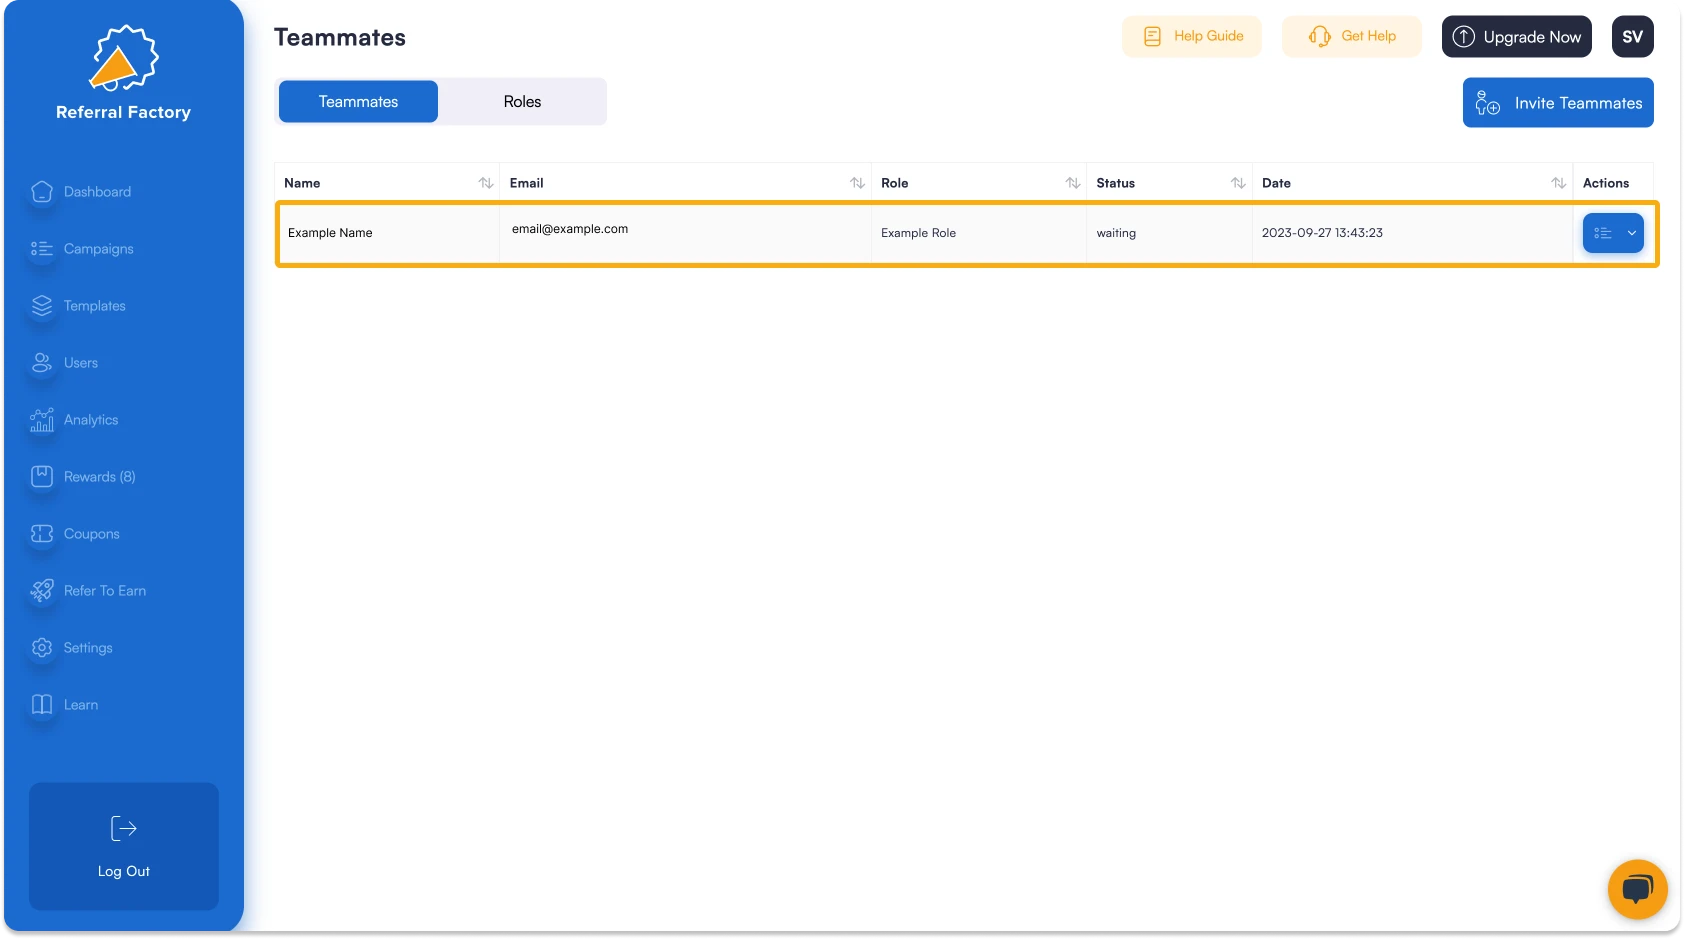 Screenshot of Referral Factory's referral program software dashboard showing how to invite teammates